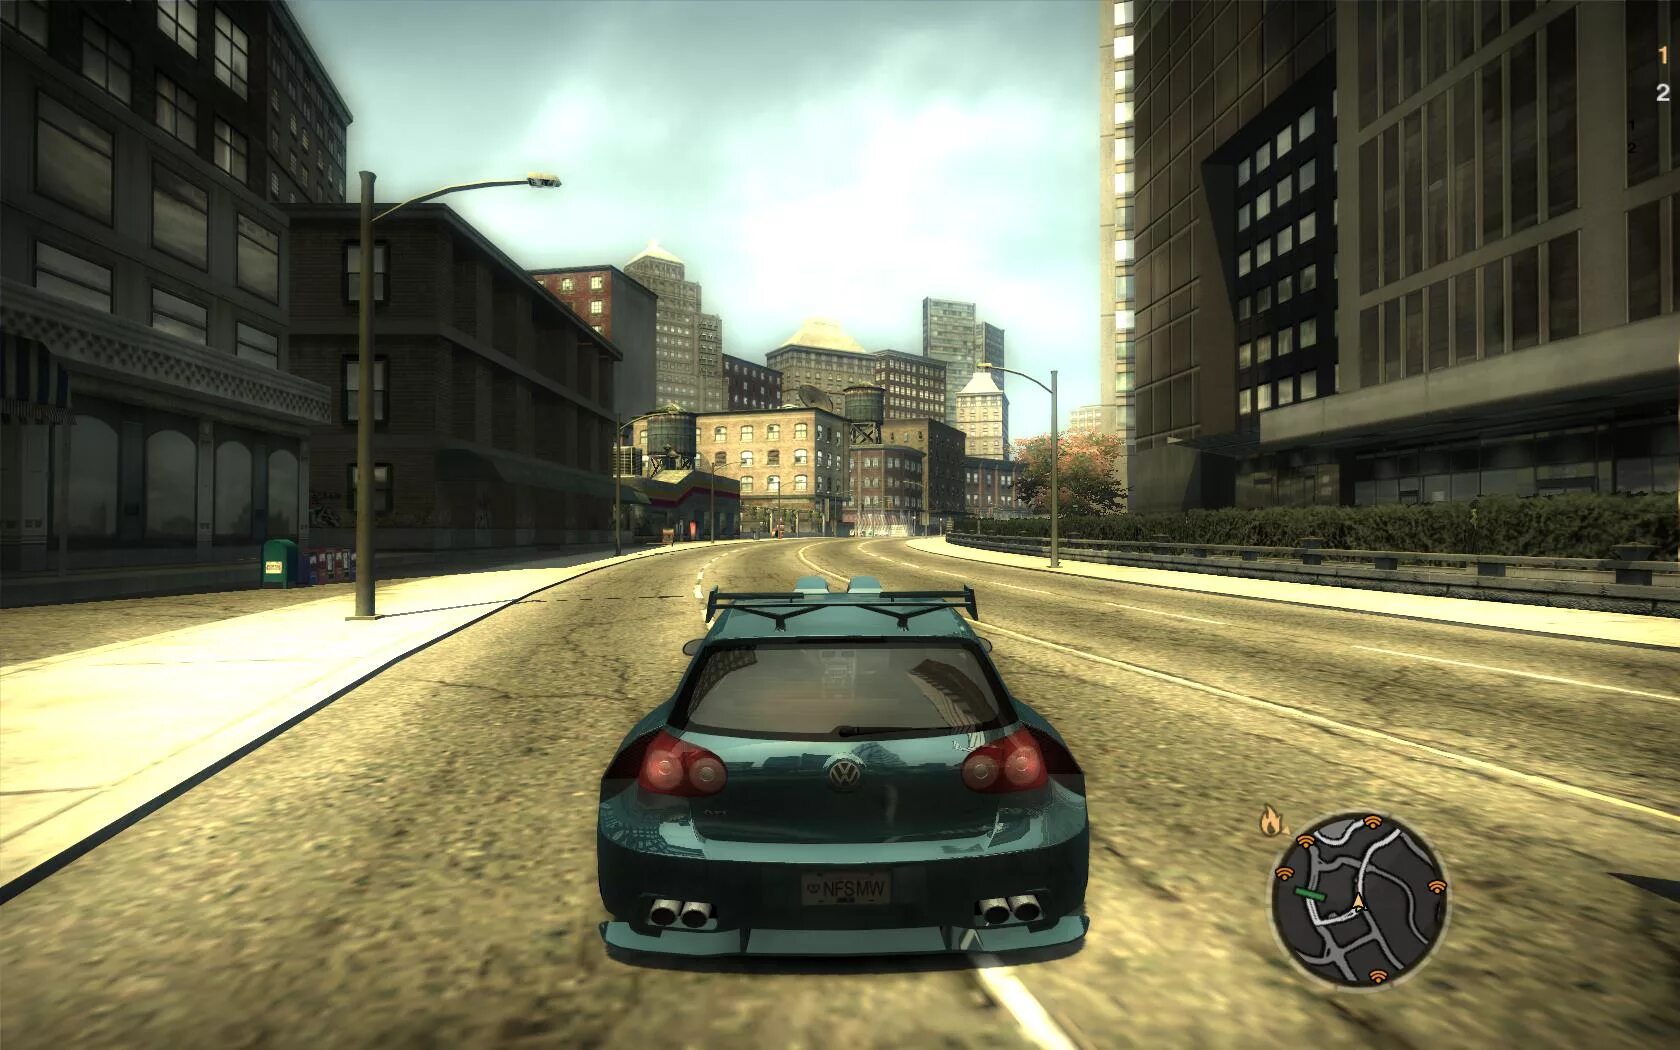 NFS most wanted 2005 геймплей. Most Water 2005. Гонки NFS most wanted 2005. NFS most wanted 2005 мост.